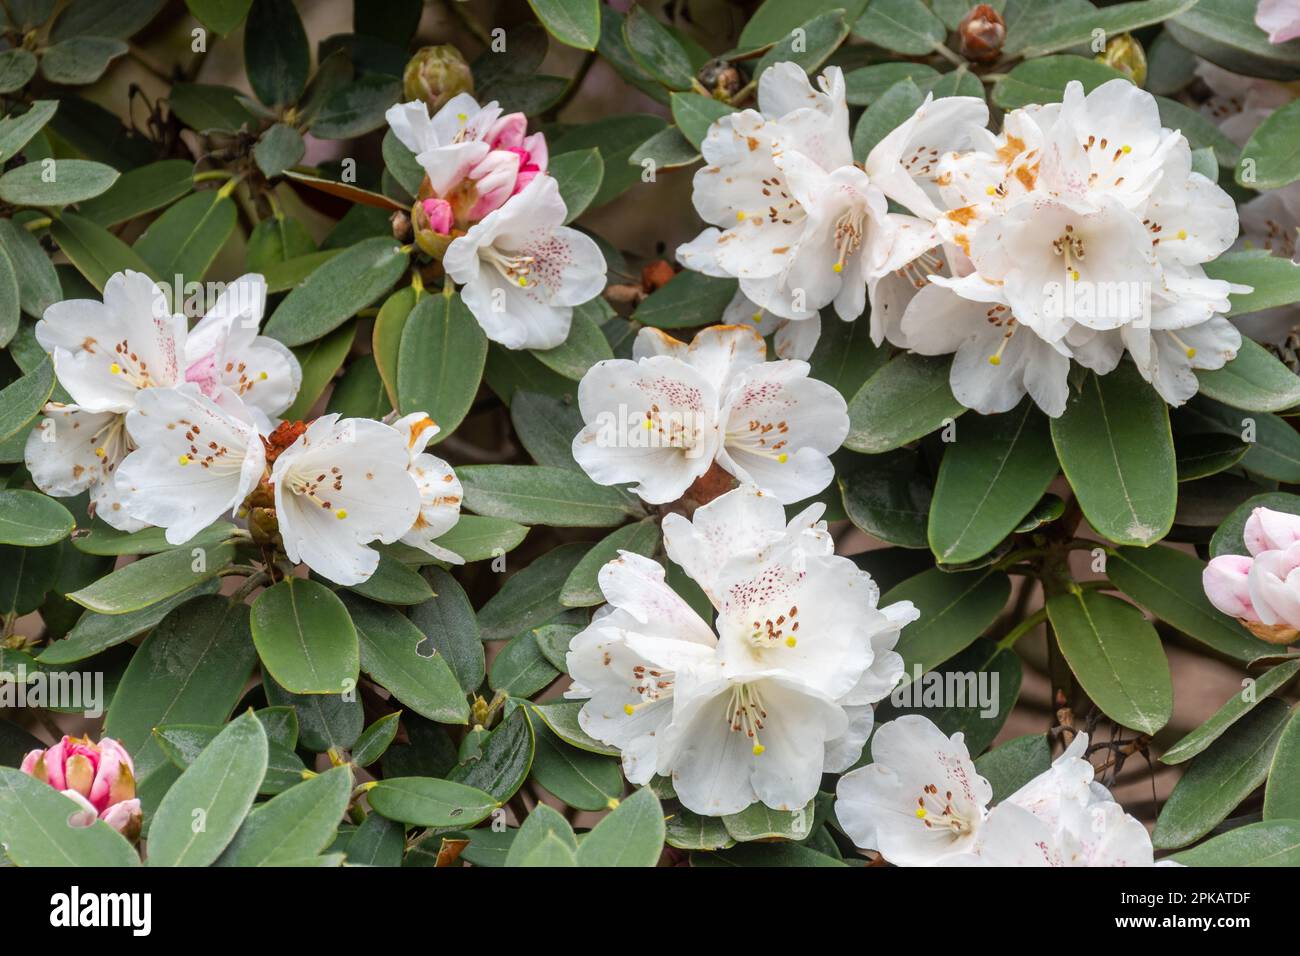 Pinky white flowers or blooms of the evergreen shrub Rhododendron pachysanthum in April or spring, UK Stock Photo